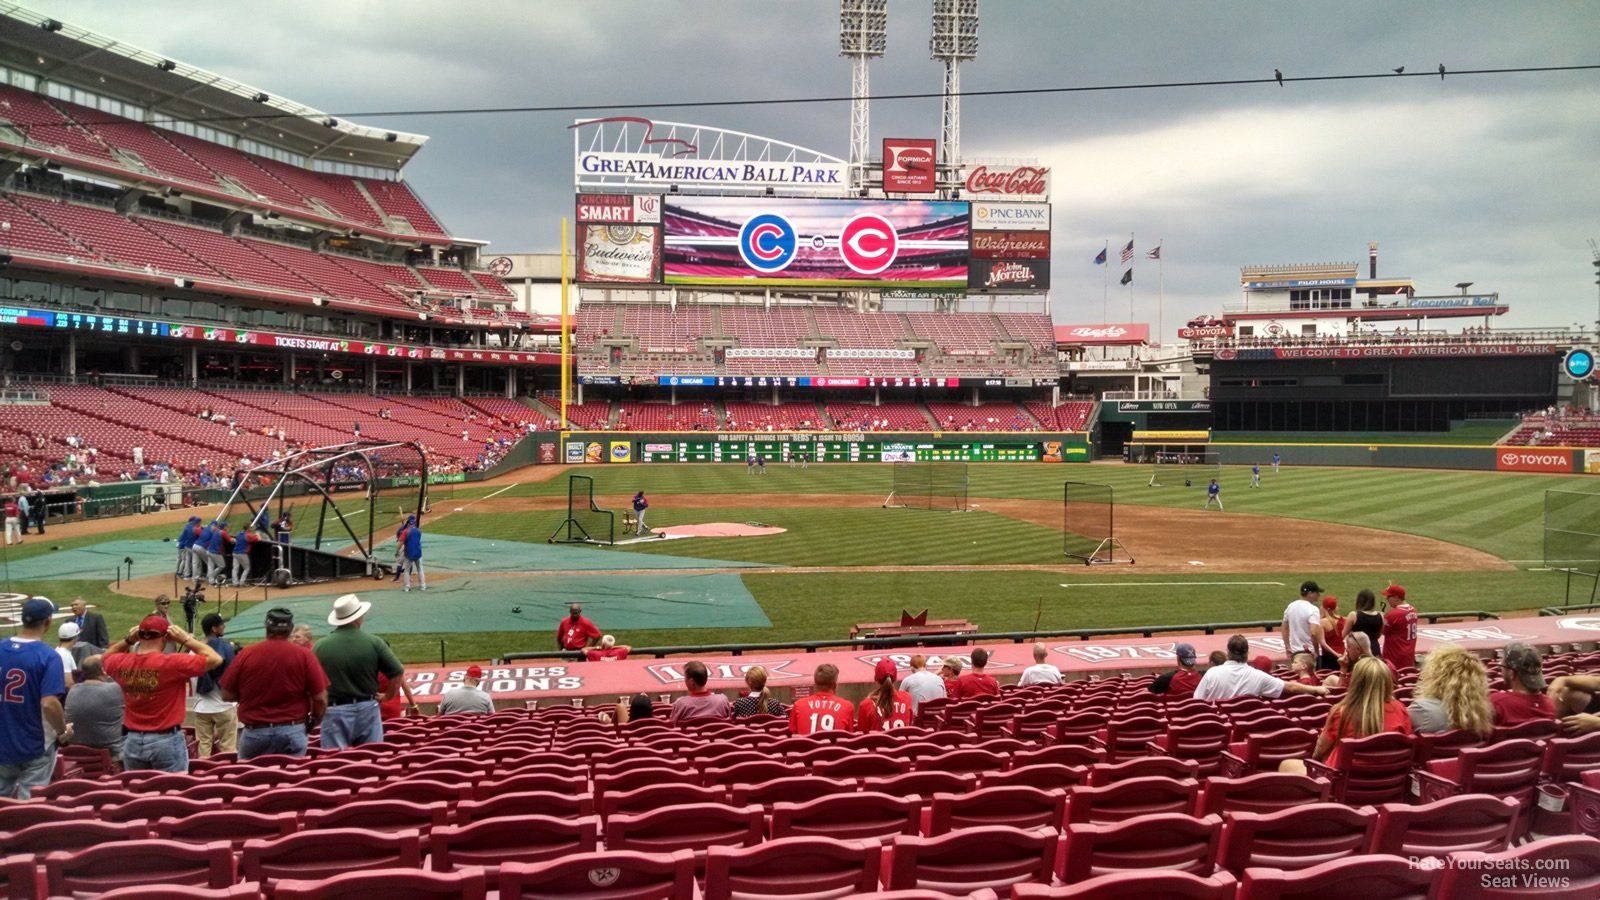 Section 128 at Great American Ball Park